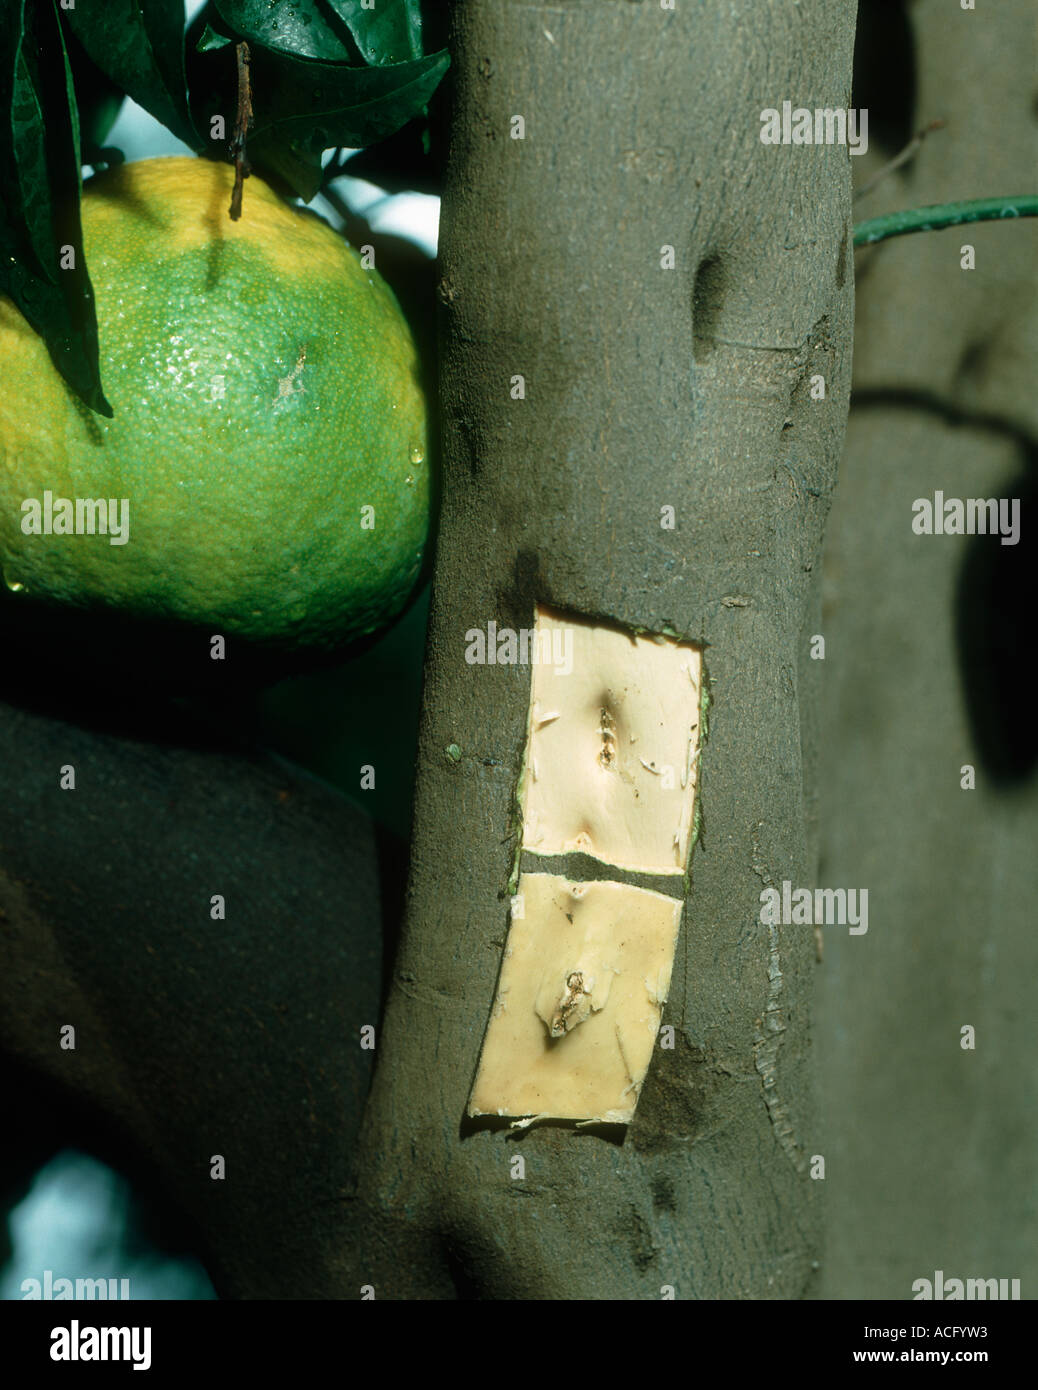 Cristacortis virus pitting in exposed main trunk of a tangelo tree Stock Photo